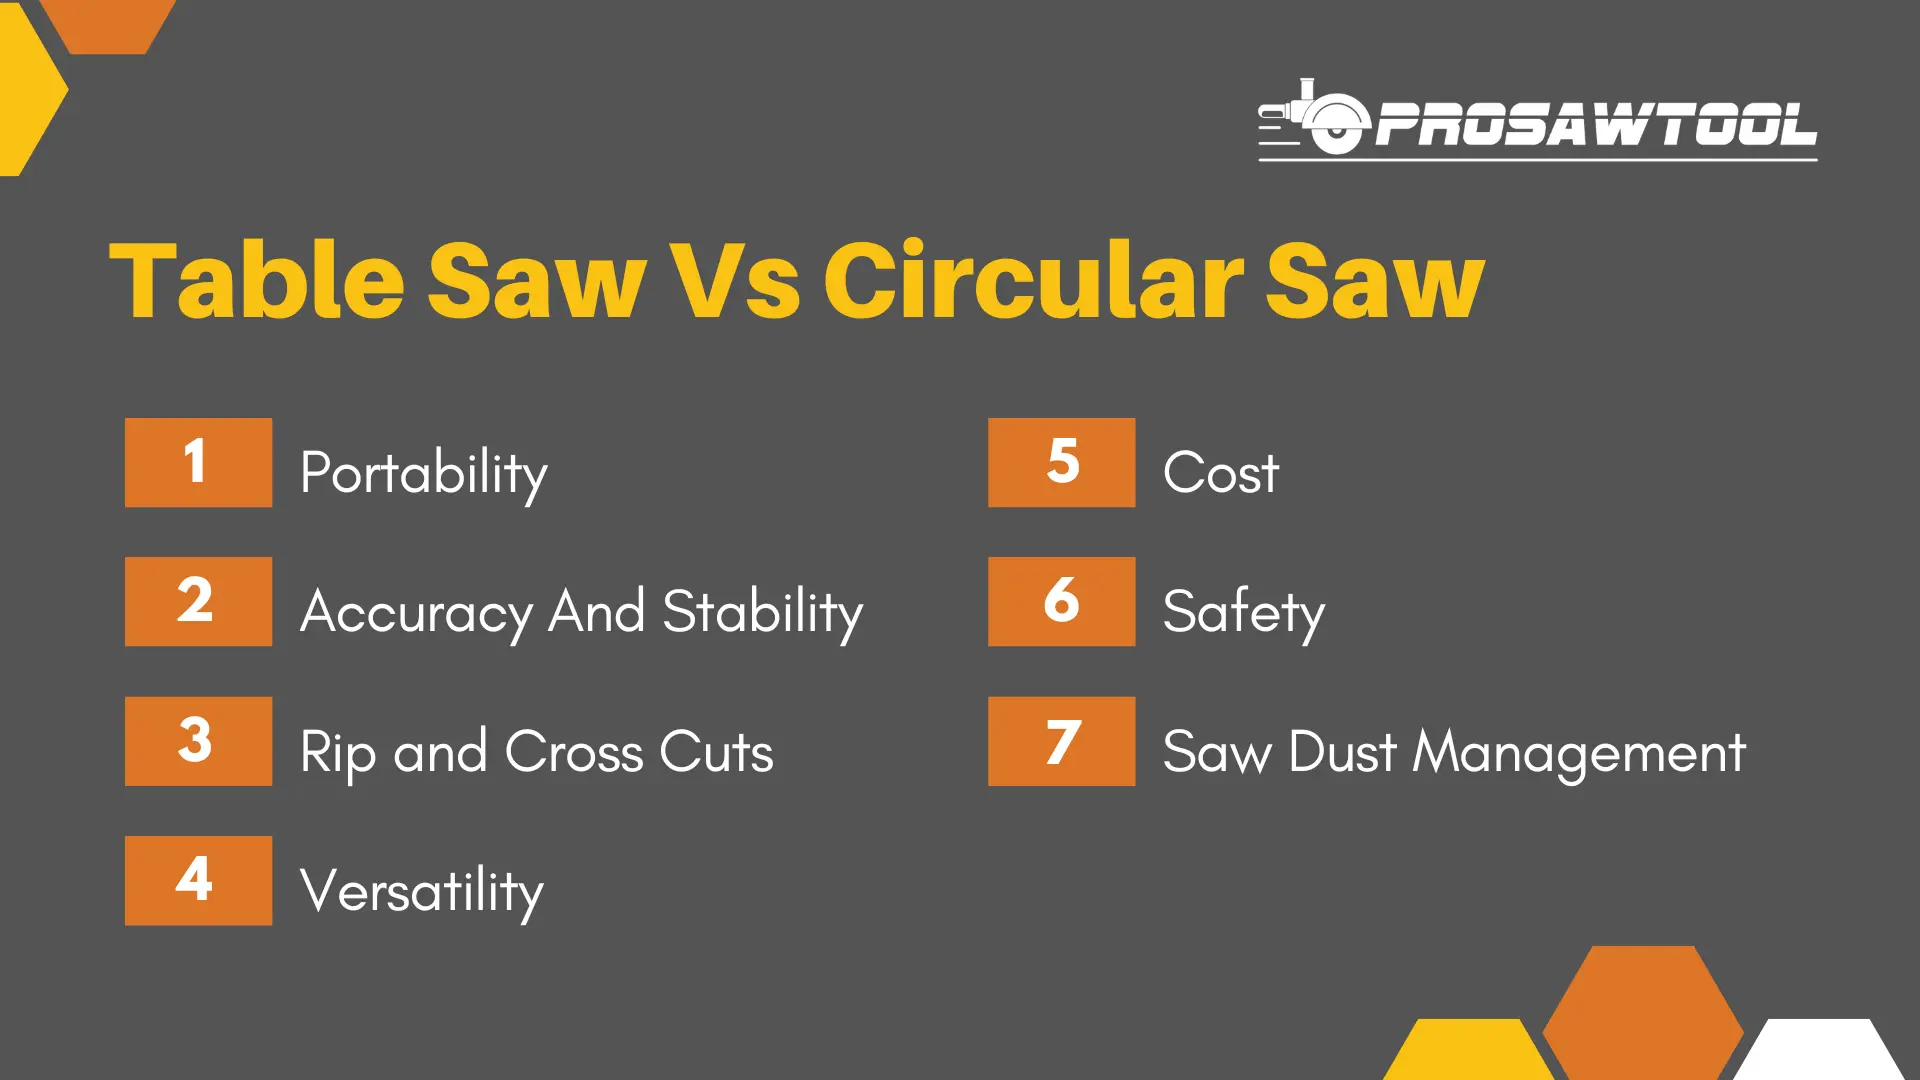 Major Difference Between Table Saw and Circular Saw